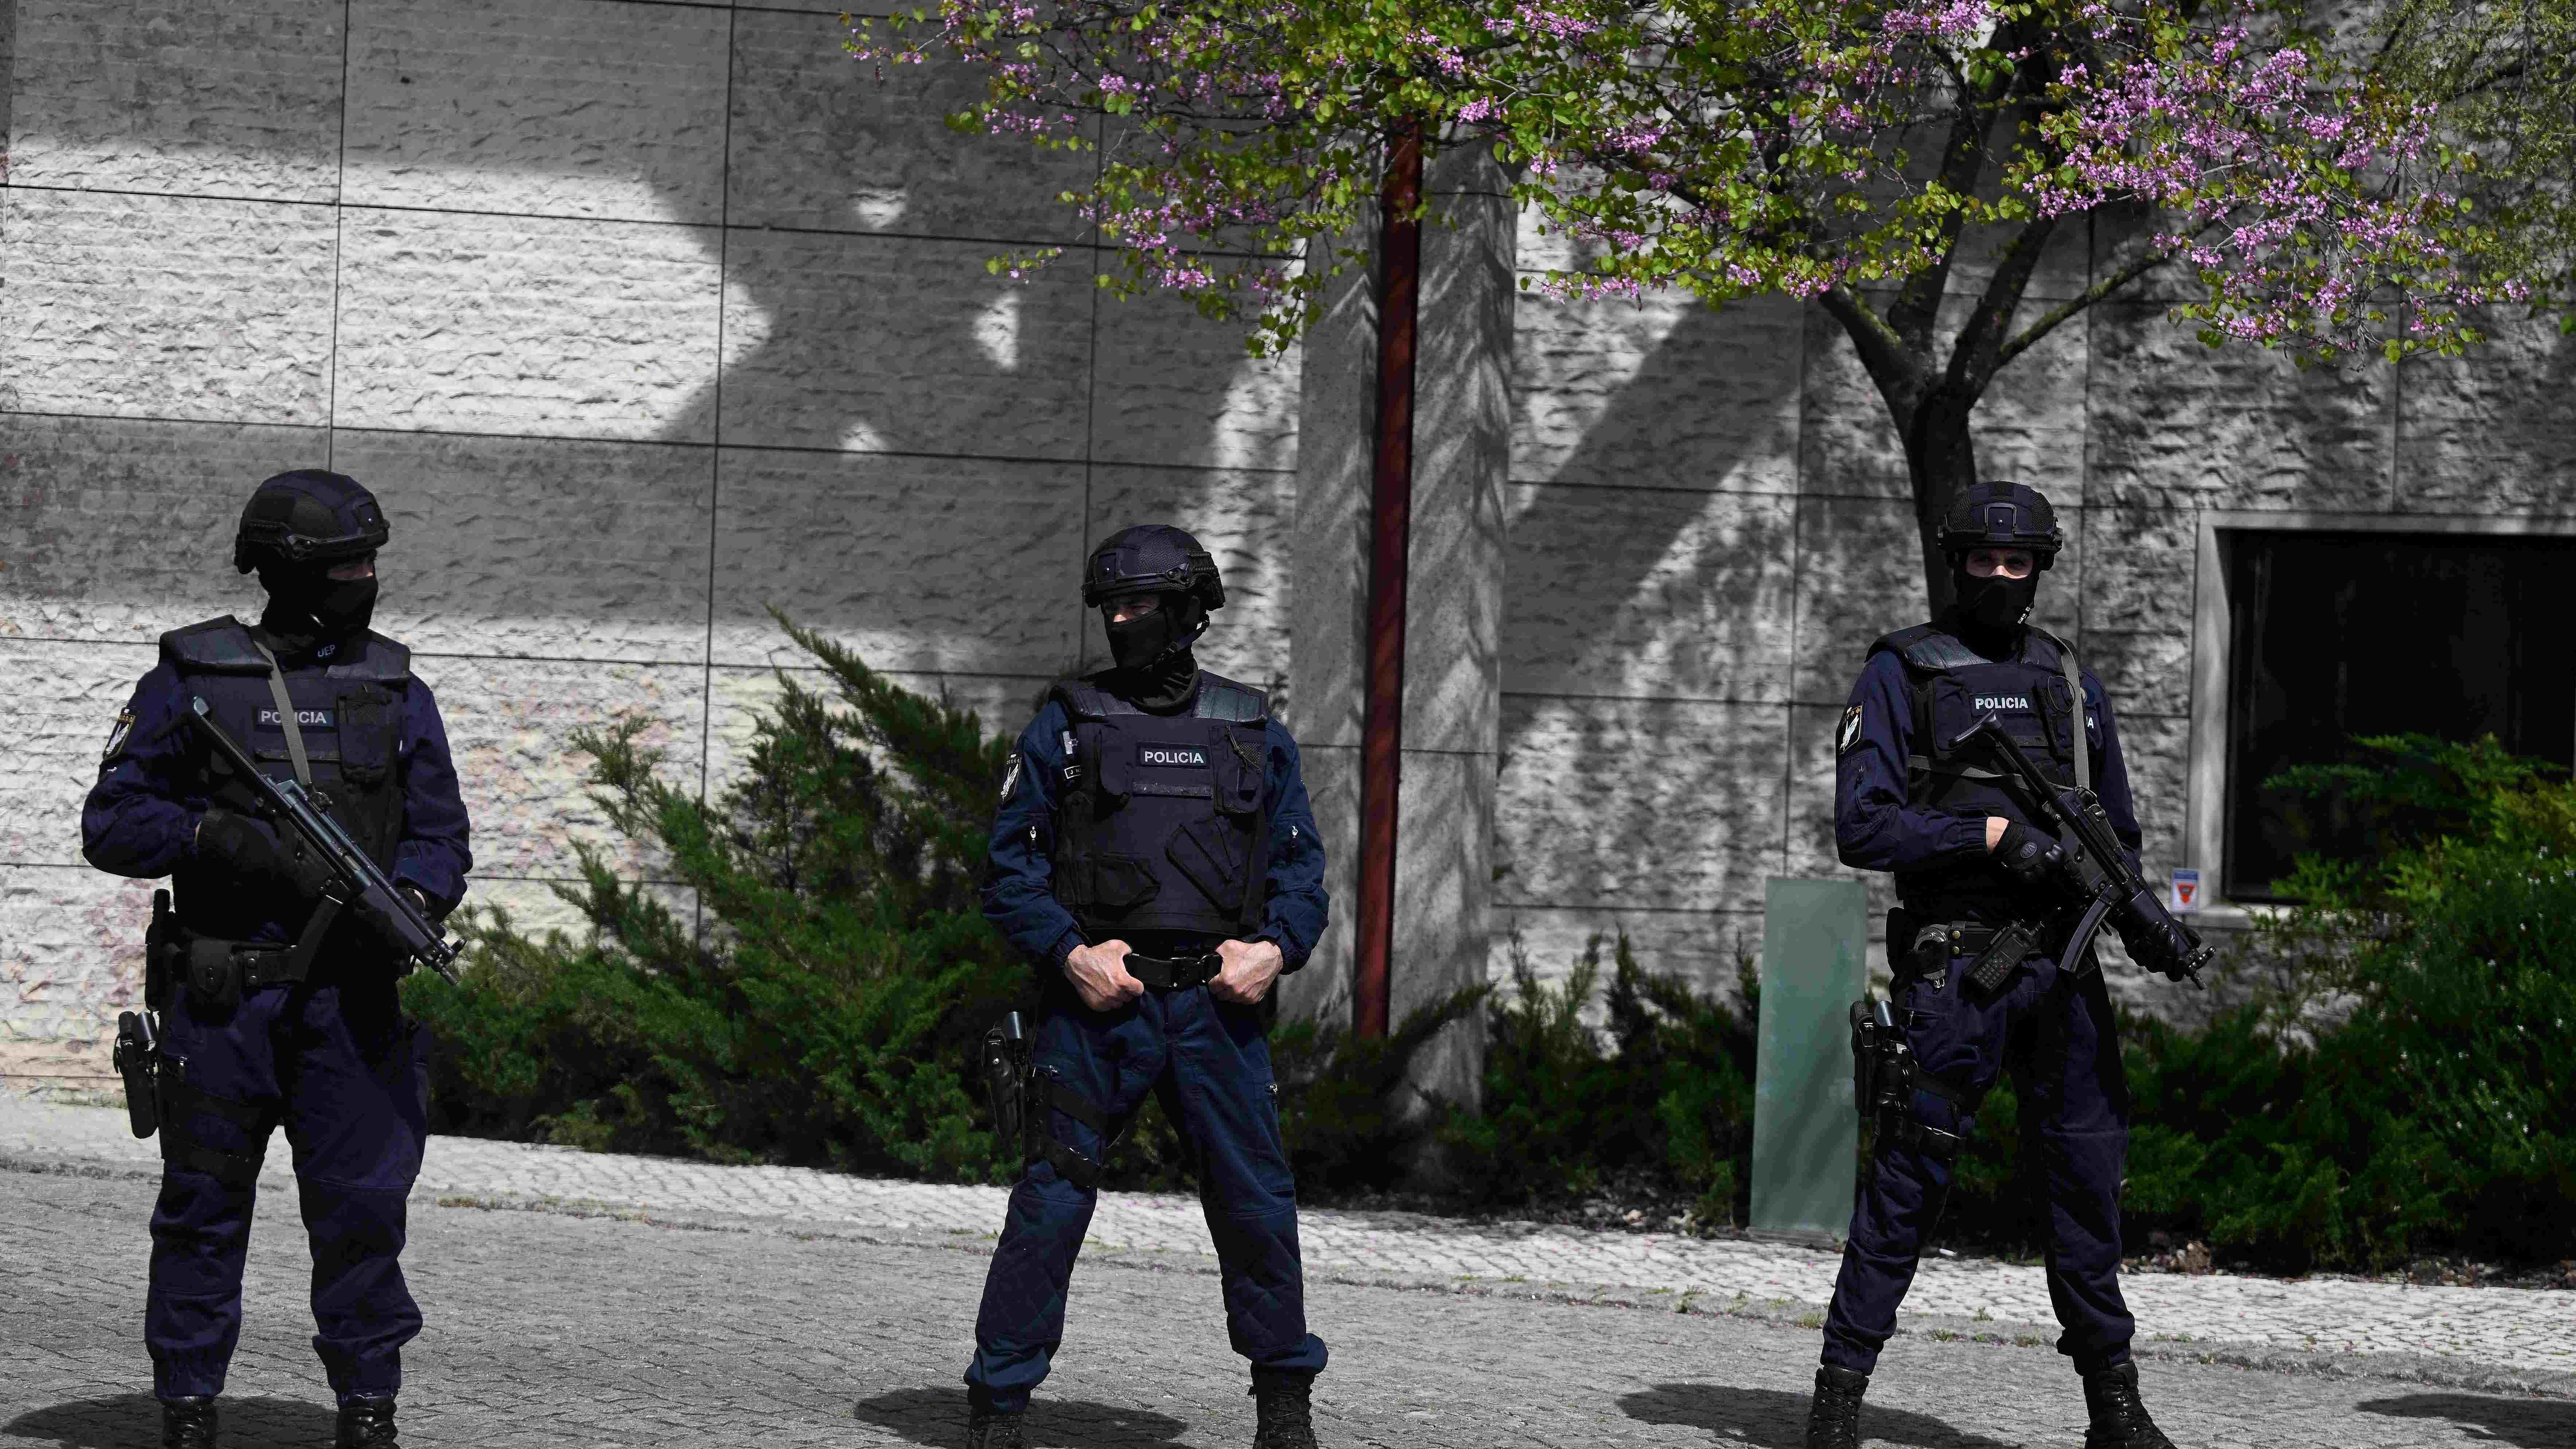 Portuguese police officers stand guard in front of the Ismaili Islamic centre in Lisbon, after two people died following a knife attack that wounded several others, on March 28, 2023. - "The attack left several people wounded and, for the moment, two dead," said police, adding that the suspected assailant had been arrested. Credit: AFP Photo